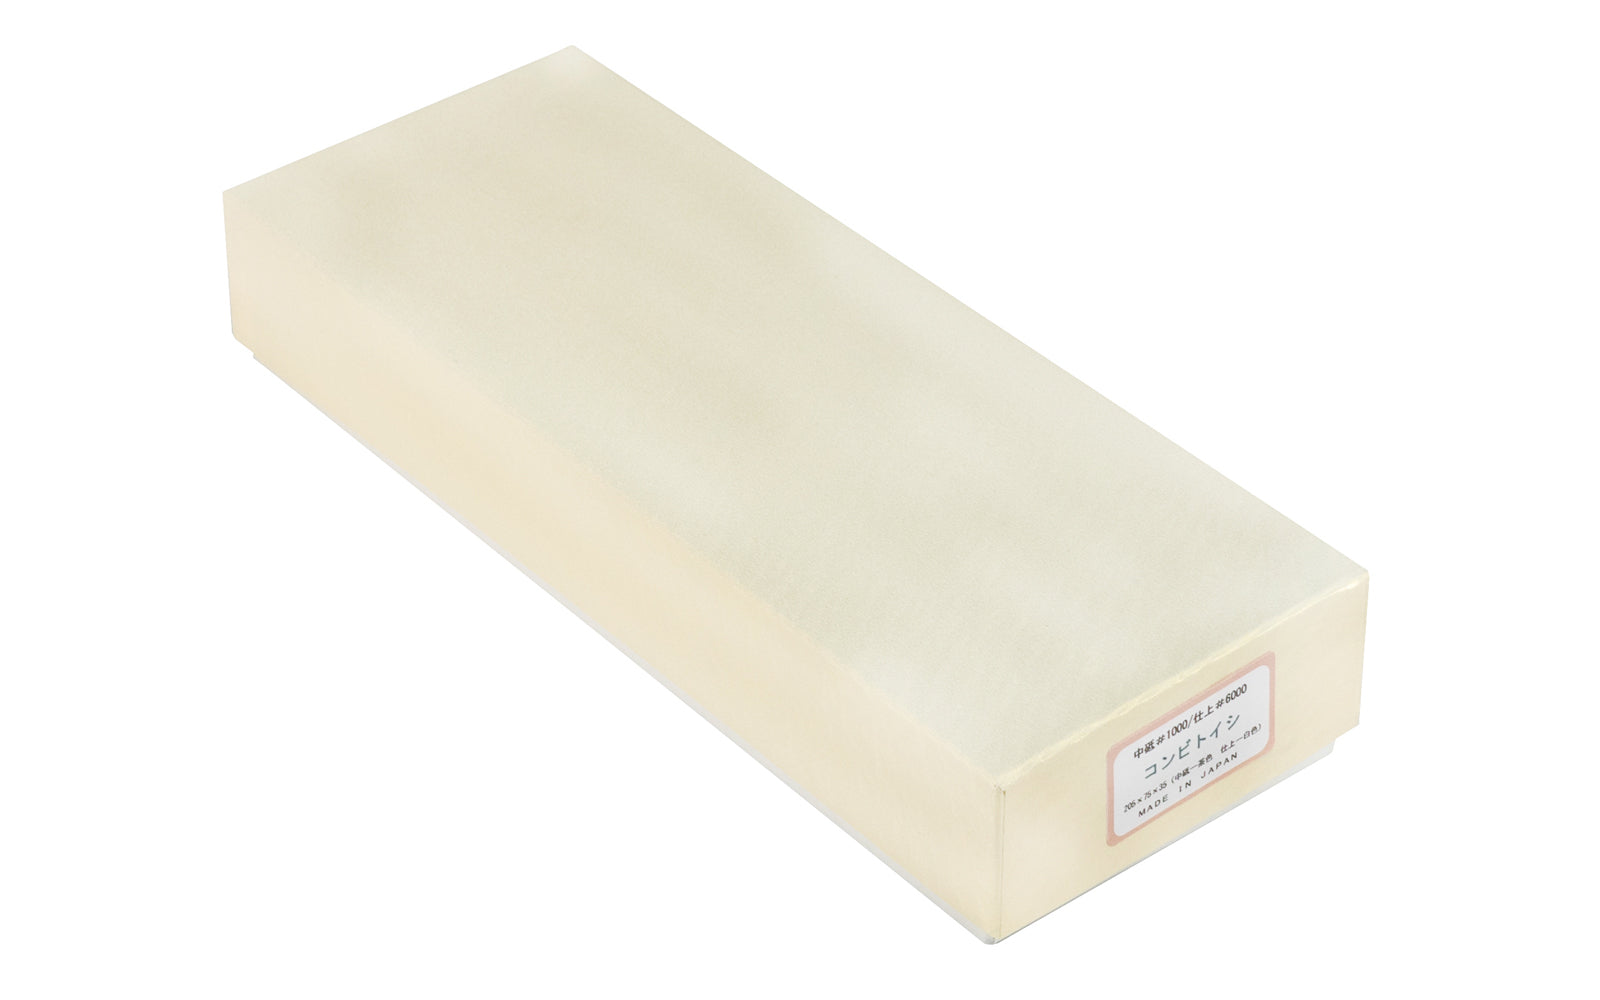 This Japanese Imanishi Double Sided Waterstone - 1000 / 6000 Grit is for sharpening carving tools, knives, planes, & kitchen knives, etc. This combination whetstone has a 1000 grit side for general sharpening, & a 6000 grit side for finish sharpening. Includes a rubber mat. Soak stone in water before use.